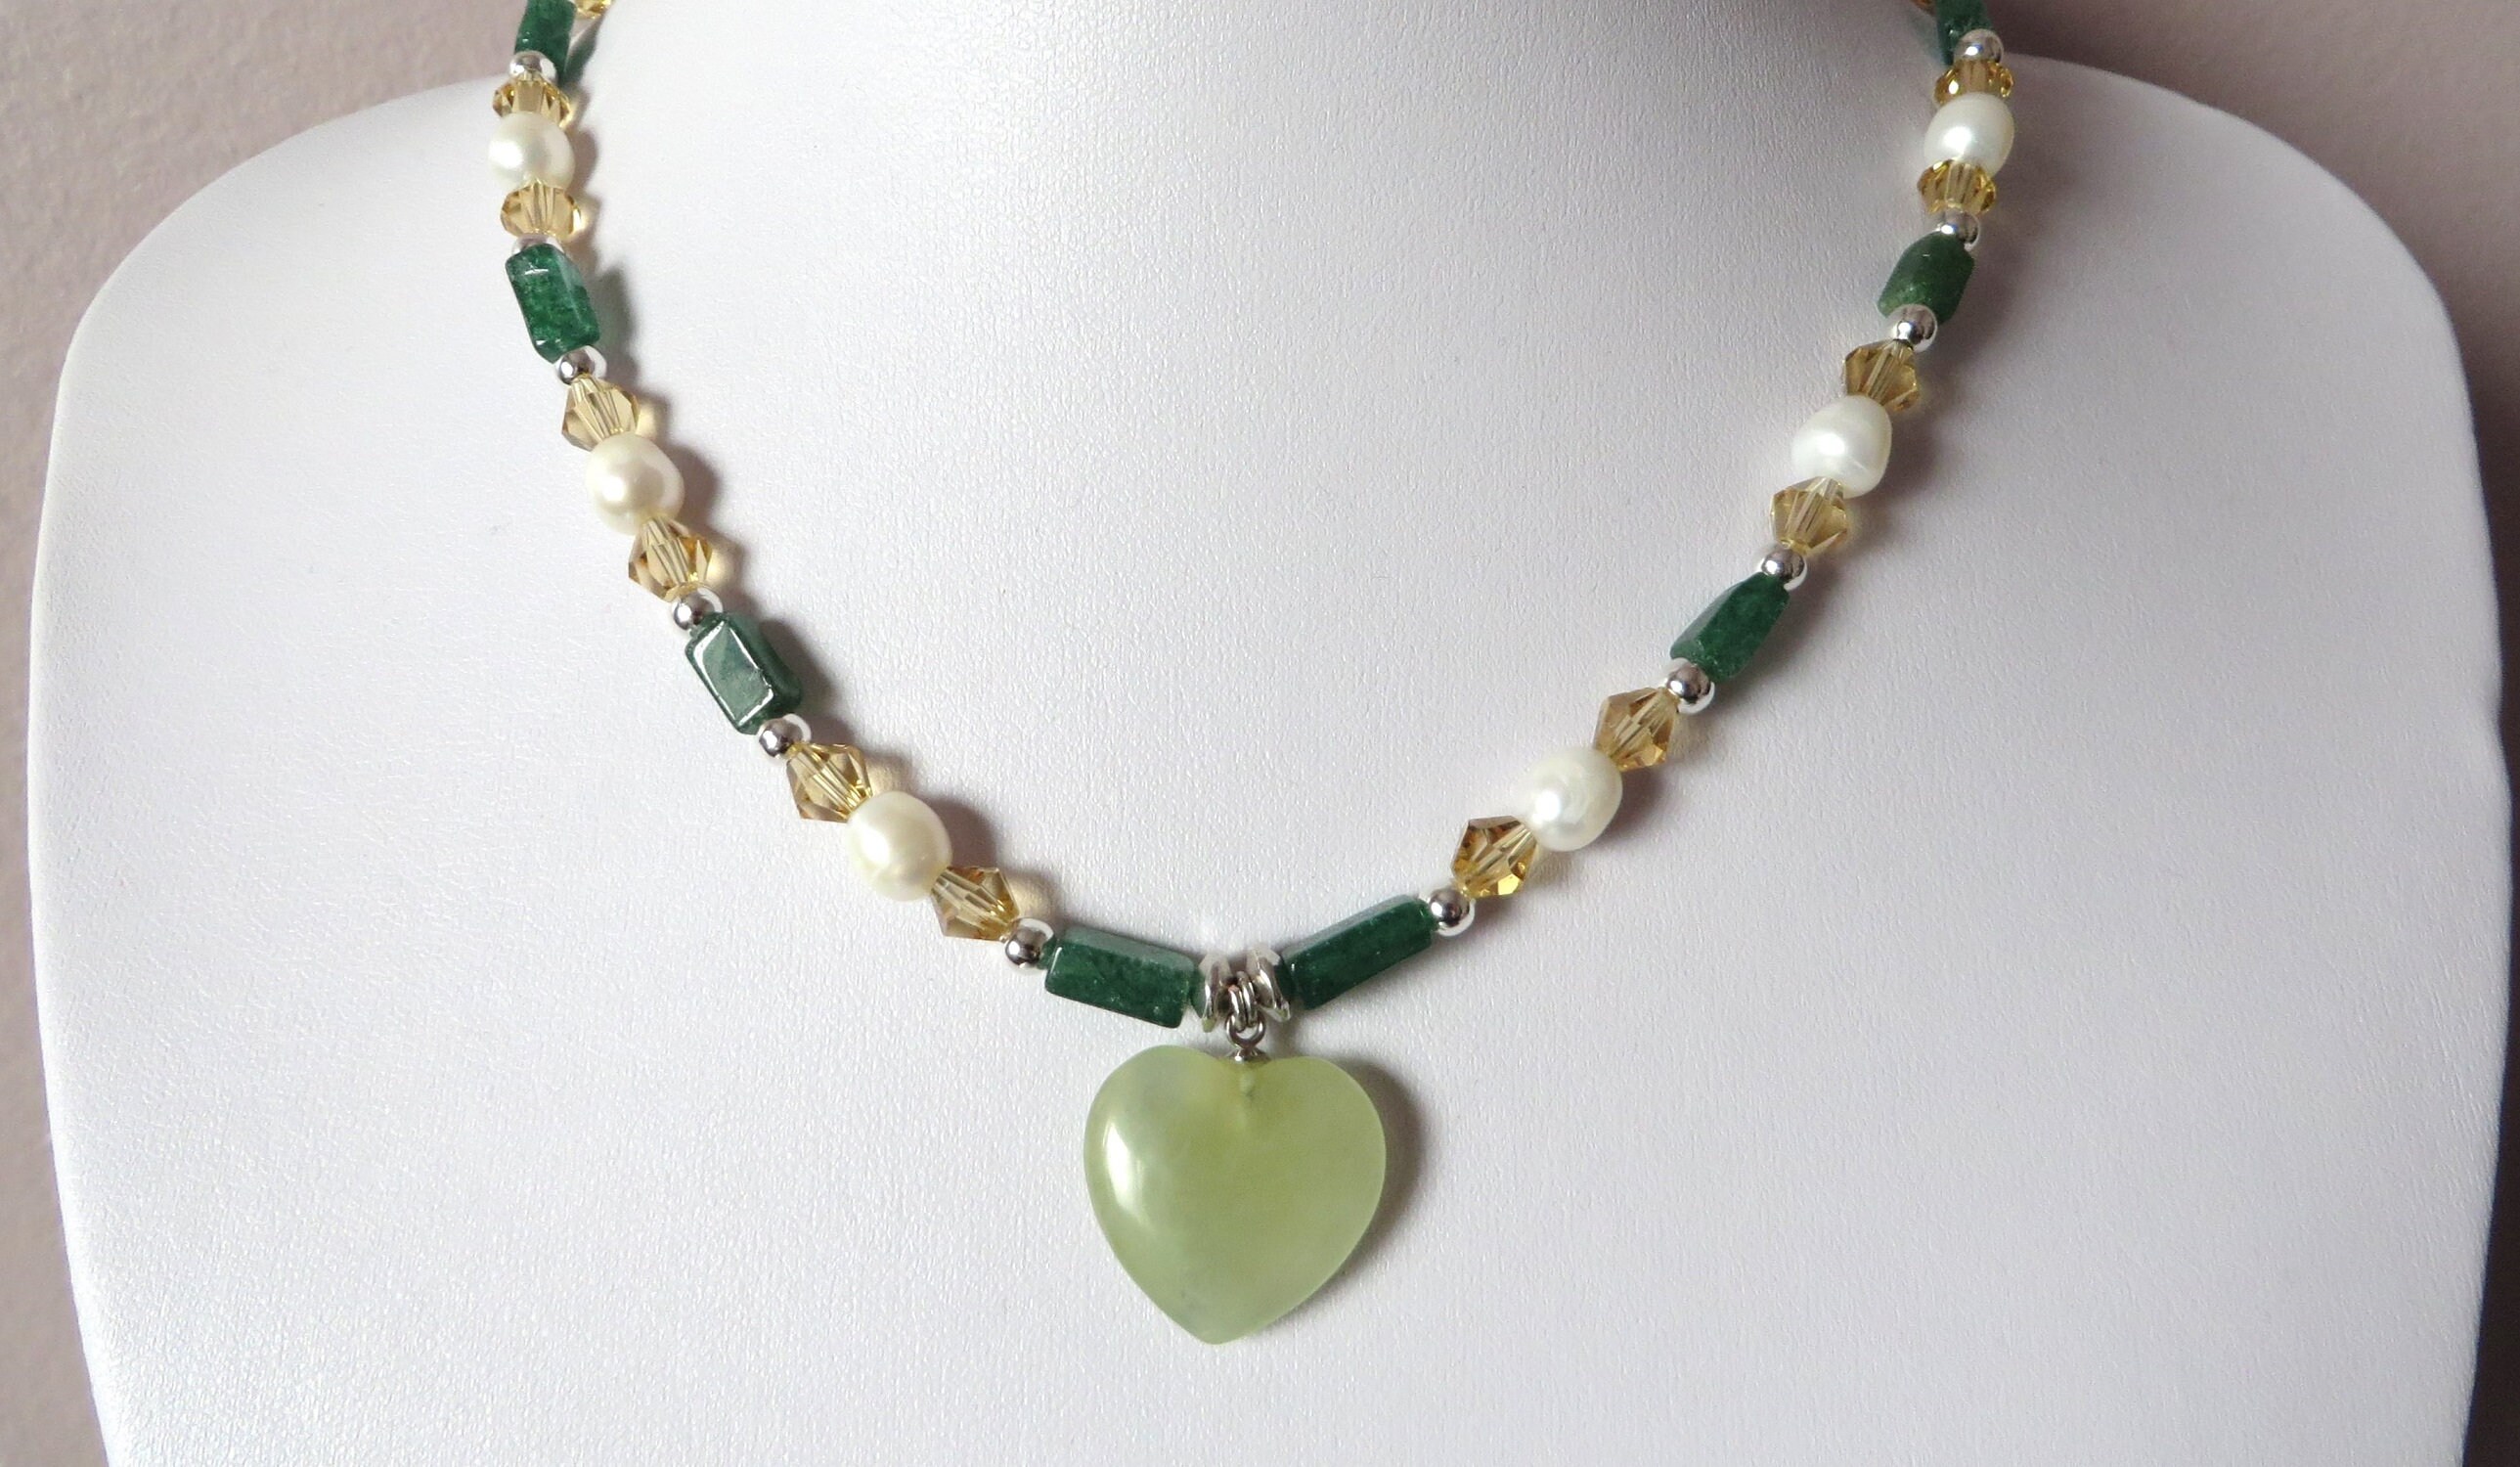 Green heart shaped stone necklace with Emerald Green | Etsy